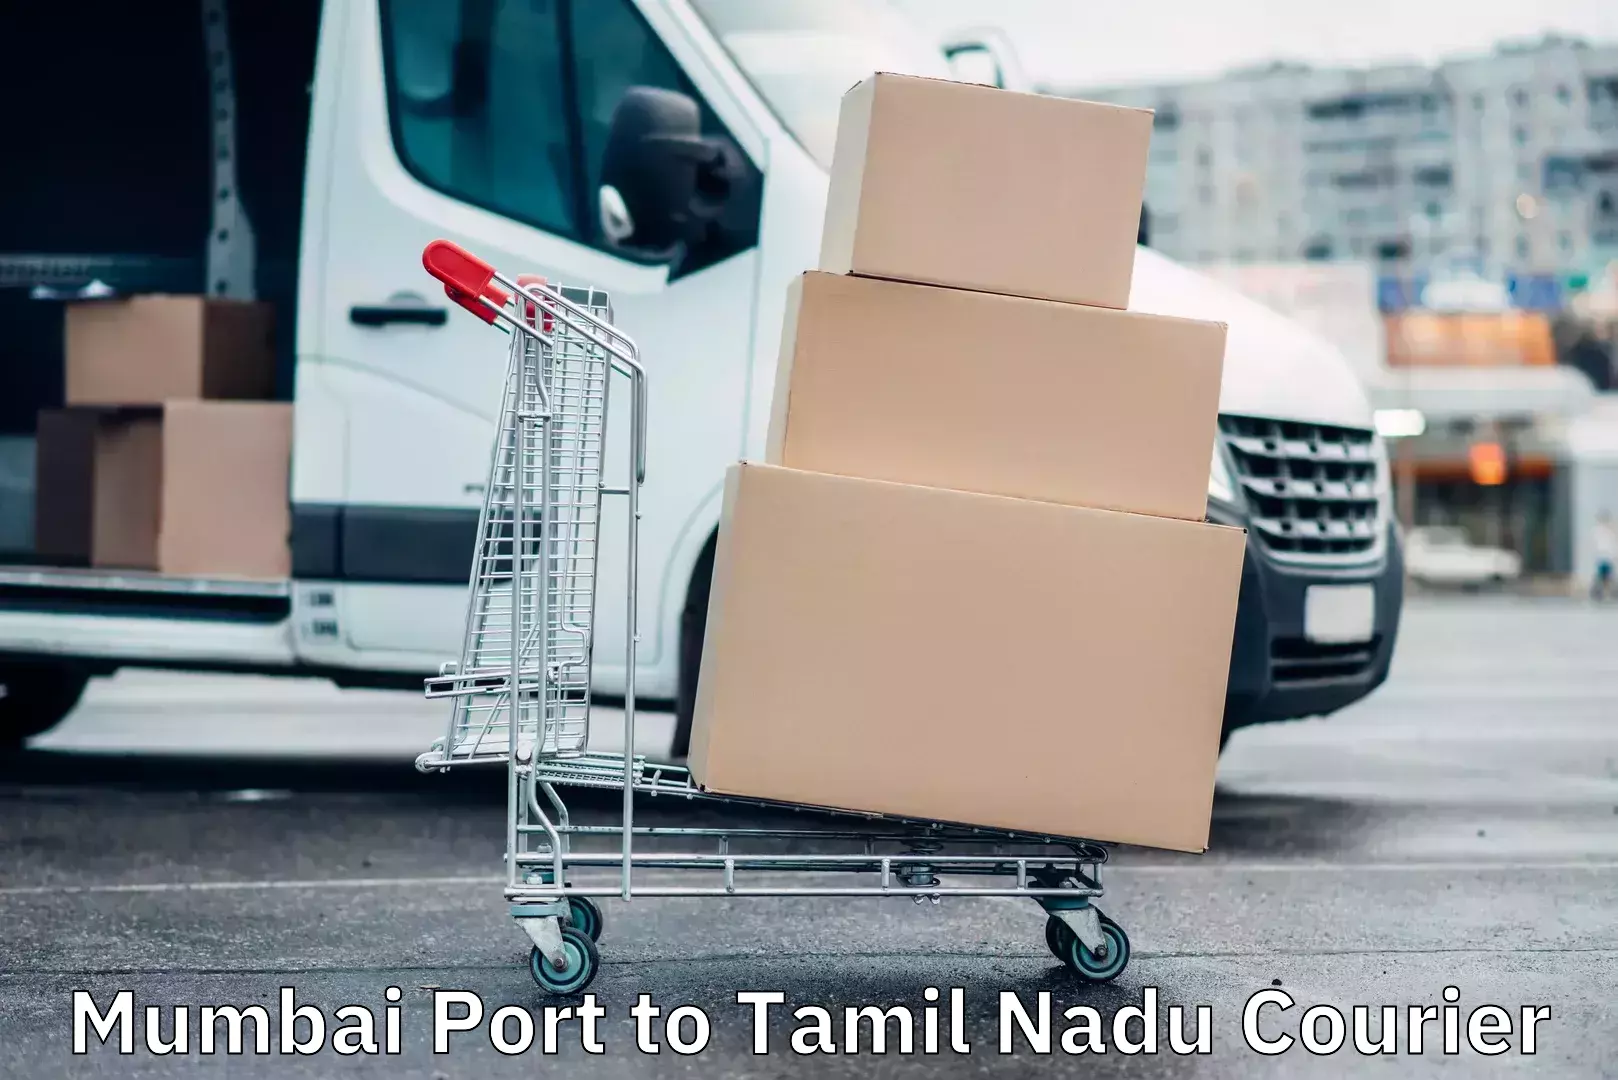 Customer-oriented courier services Mumbai Port to Tamil Nadu